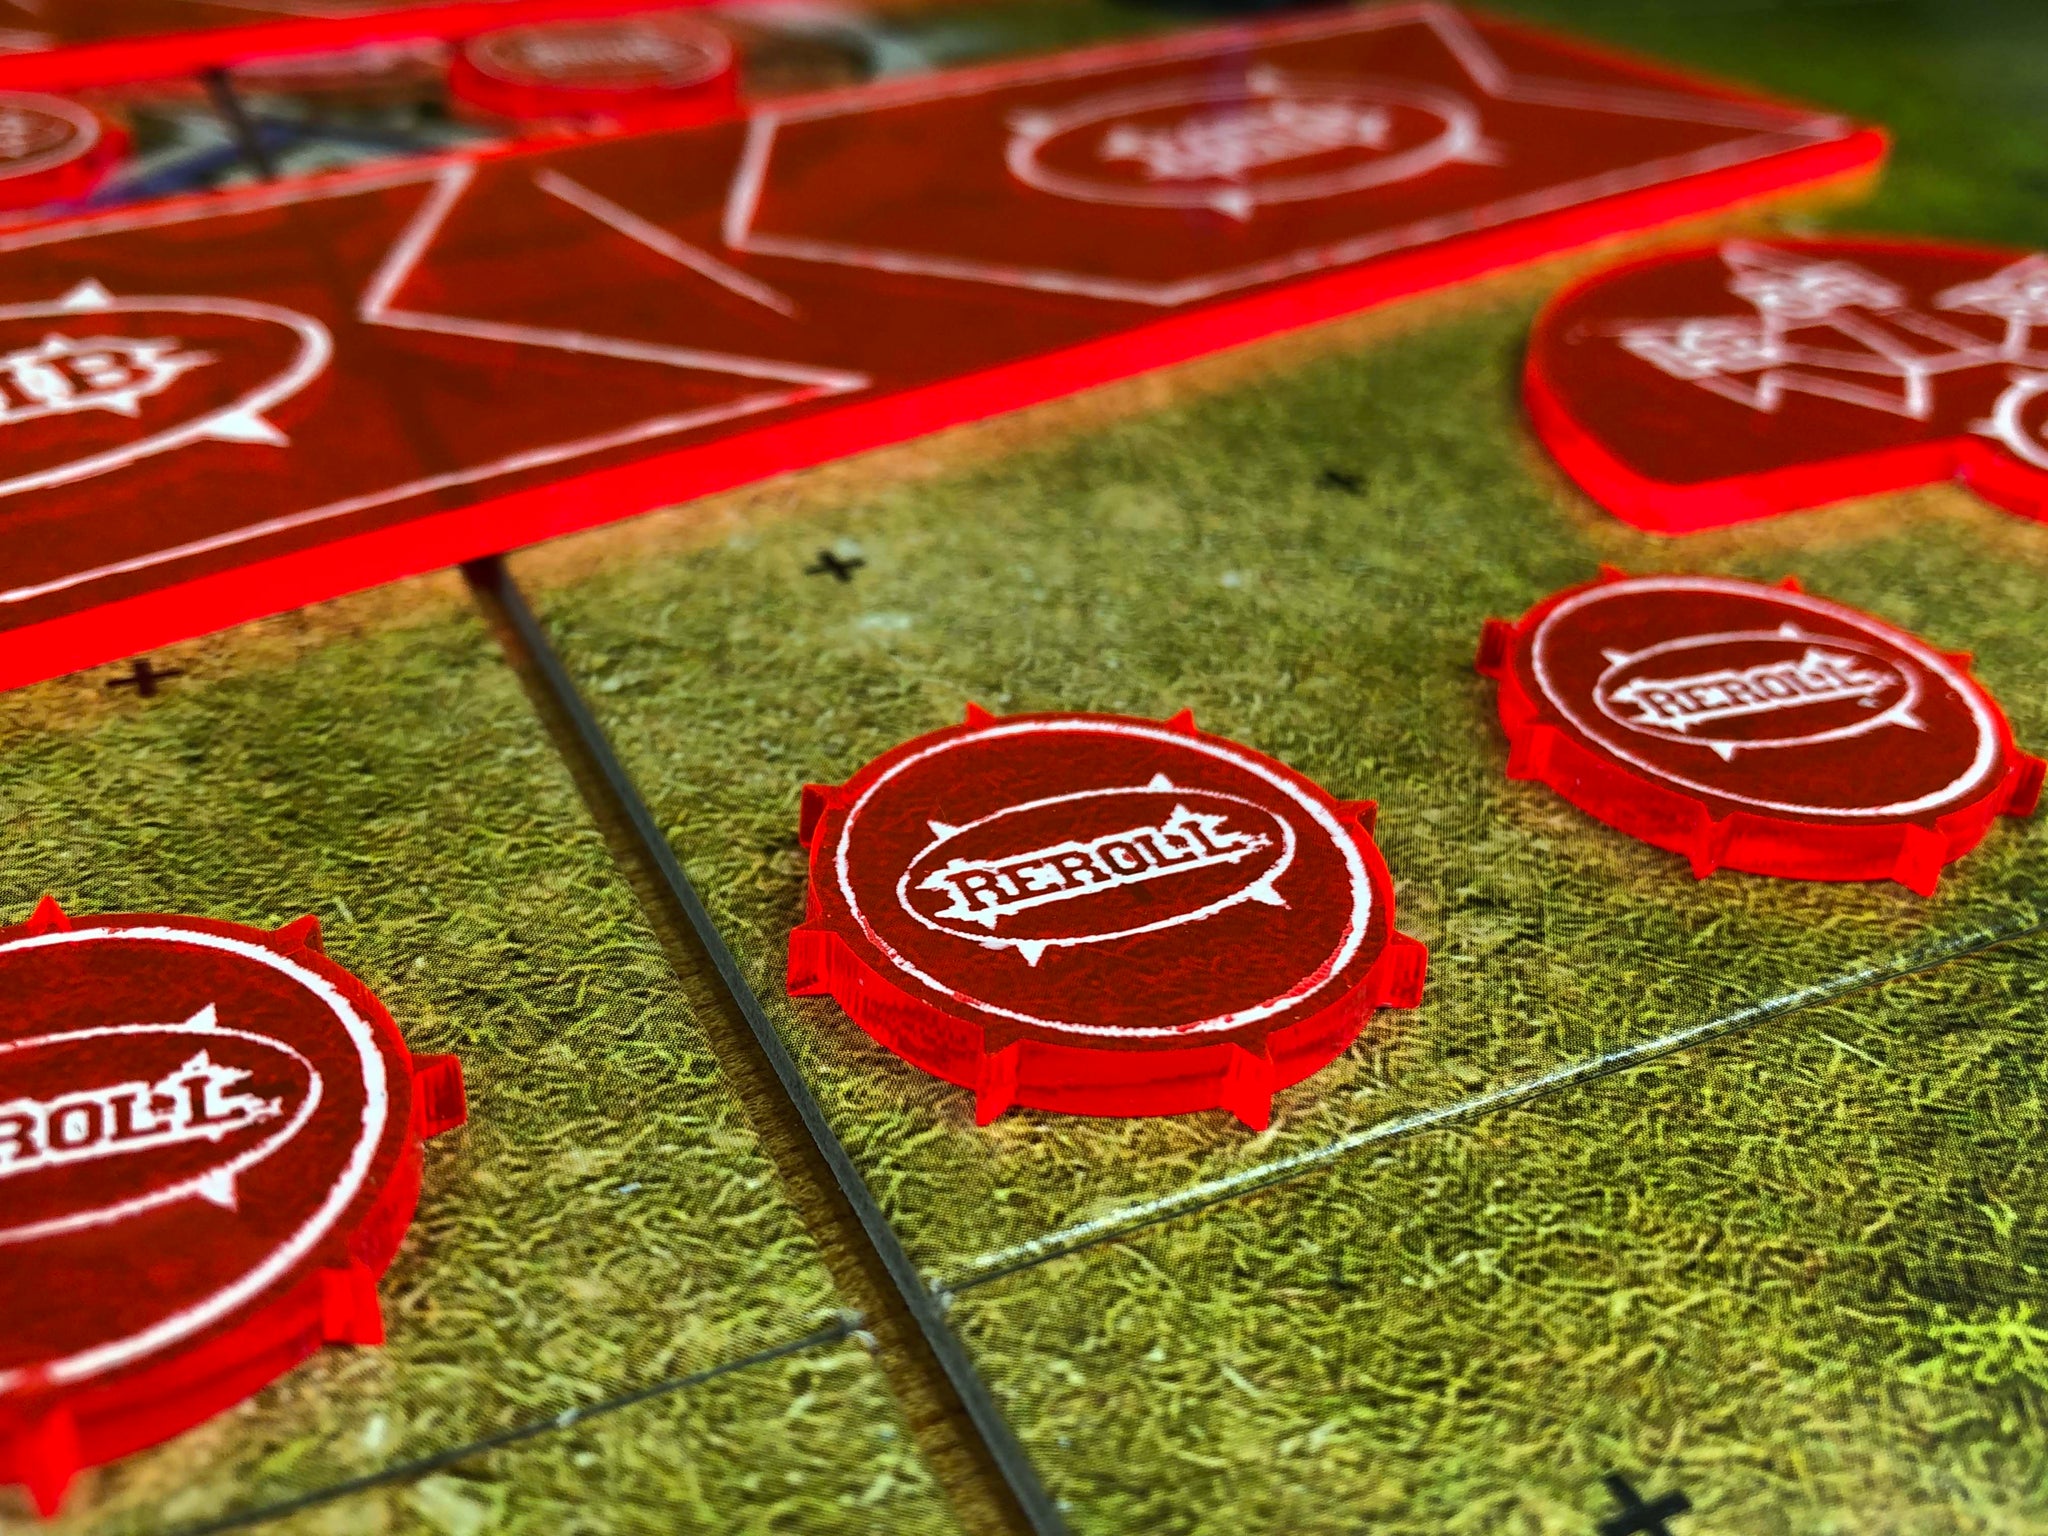 Pizza Hut Turns Boxes into Flick Football Game Boards